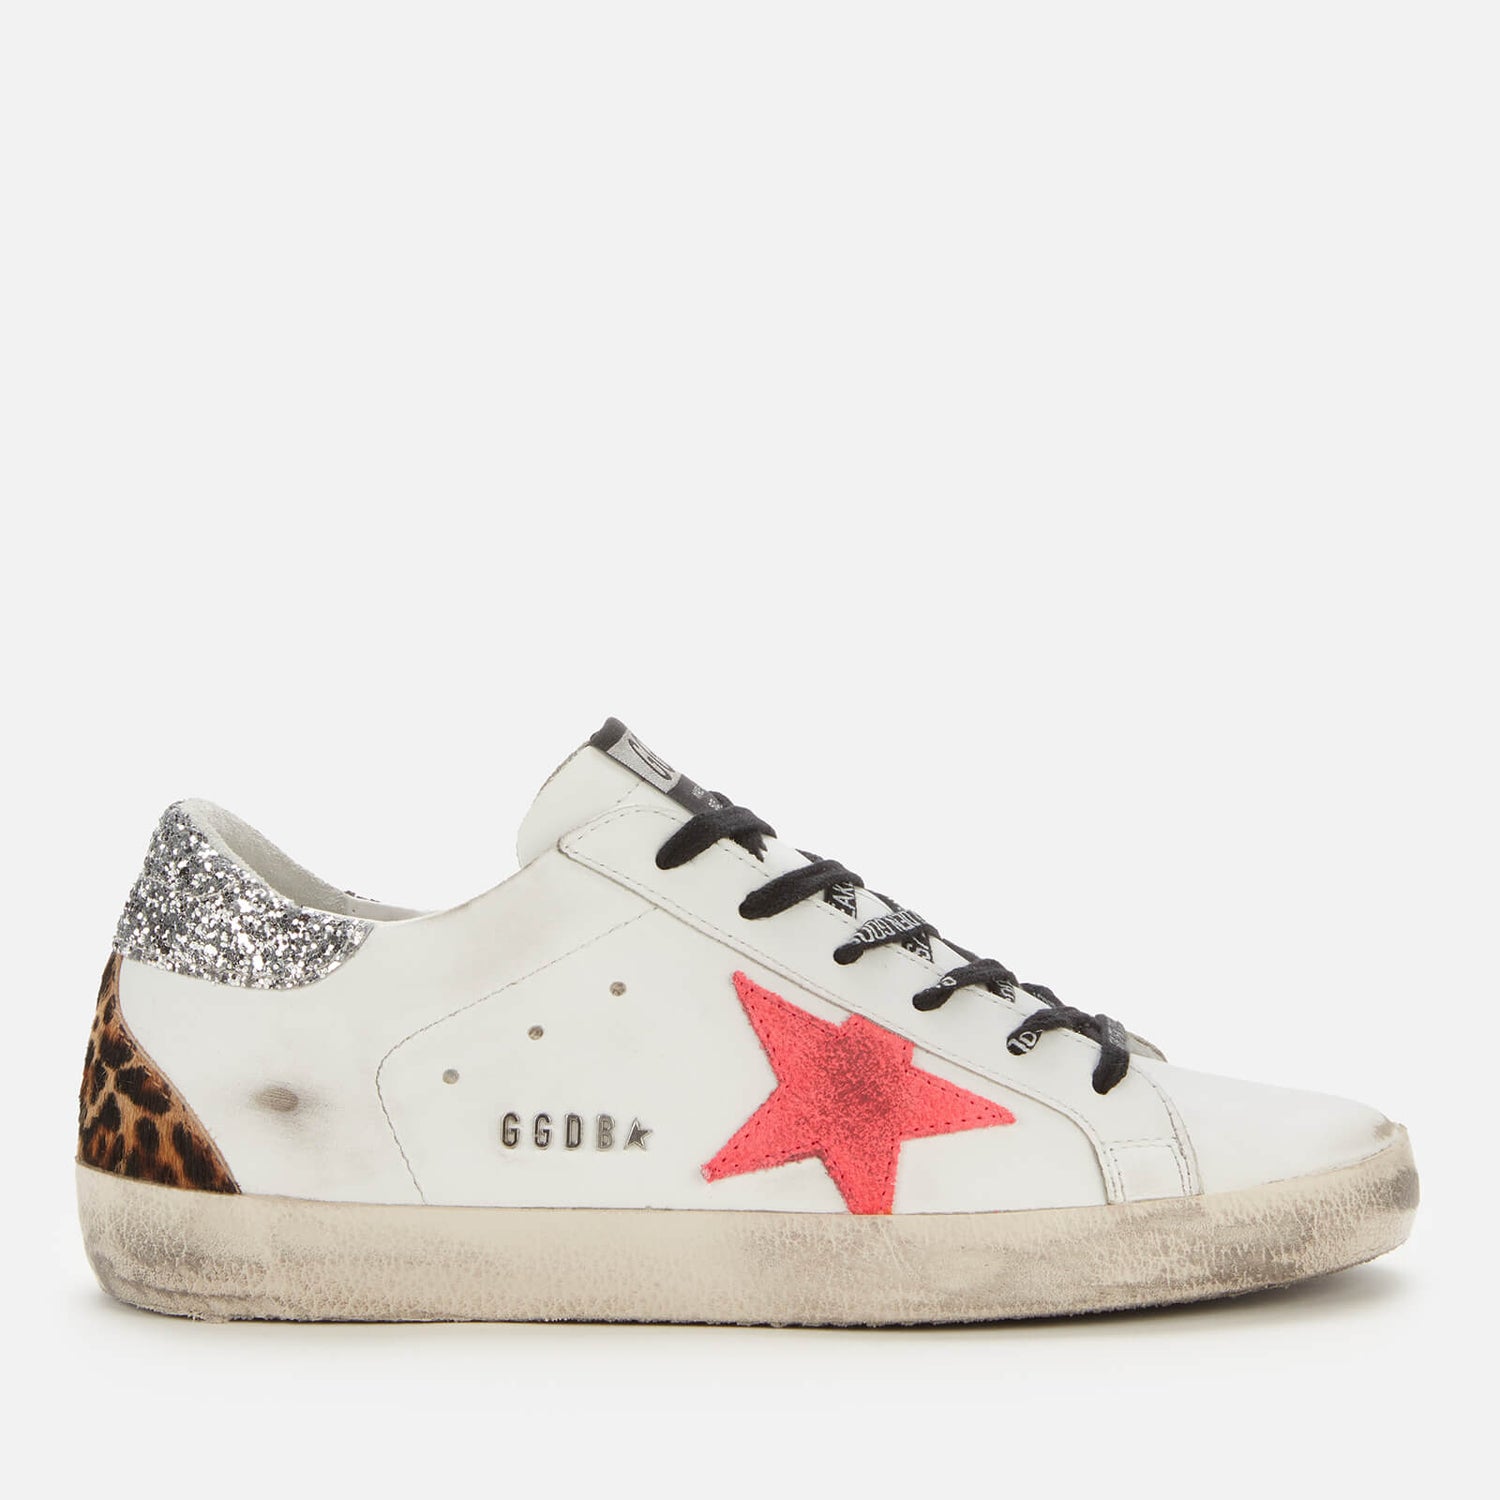 Golden Goose Women's Superstar Leather Trainers - White/Fuchsia/Silver